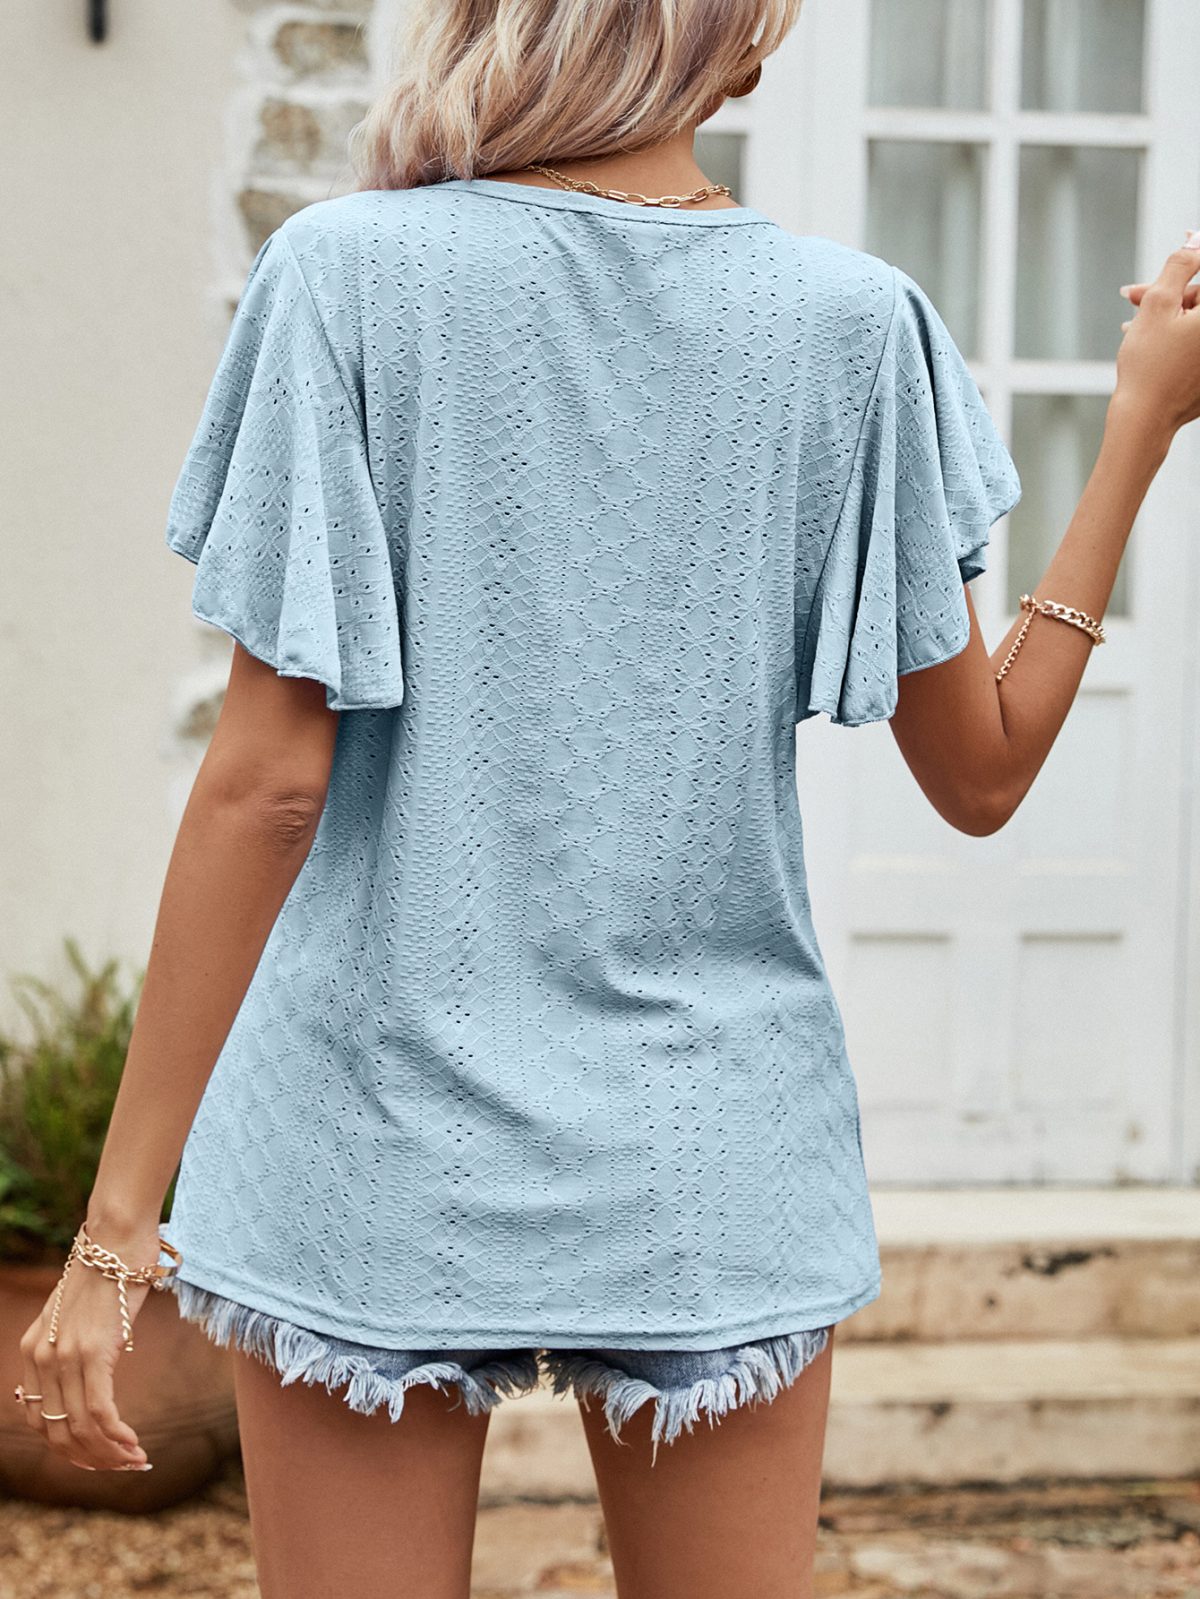 Hollow Out Cutout Out Round Neck Ruffle Sleeve Casual T-Shirt in T-shirts & Tops